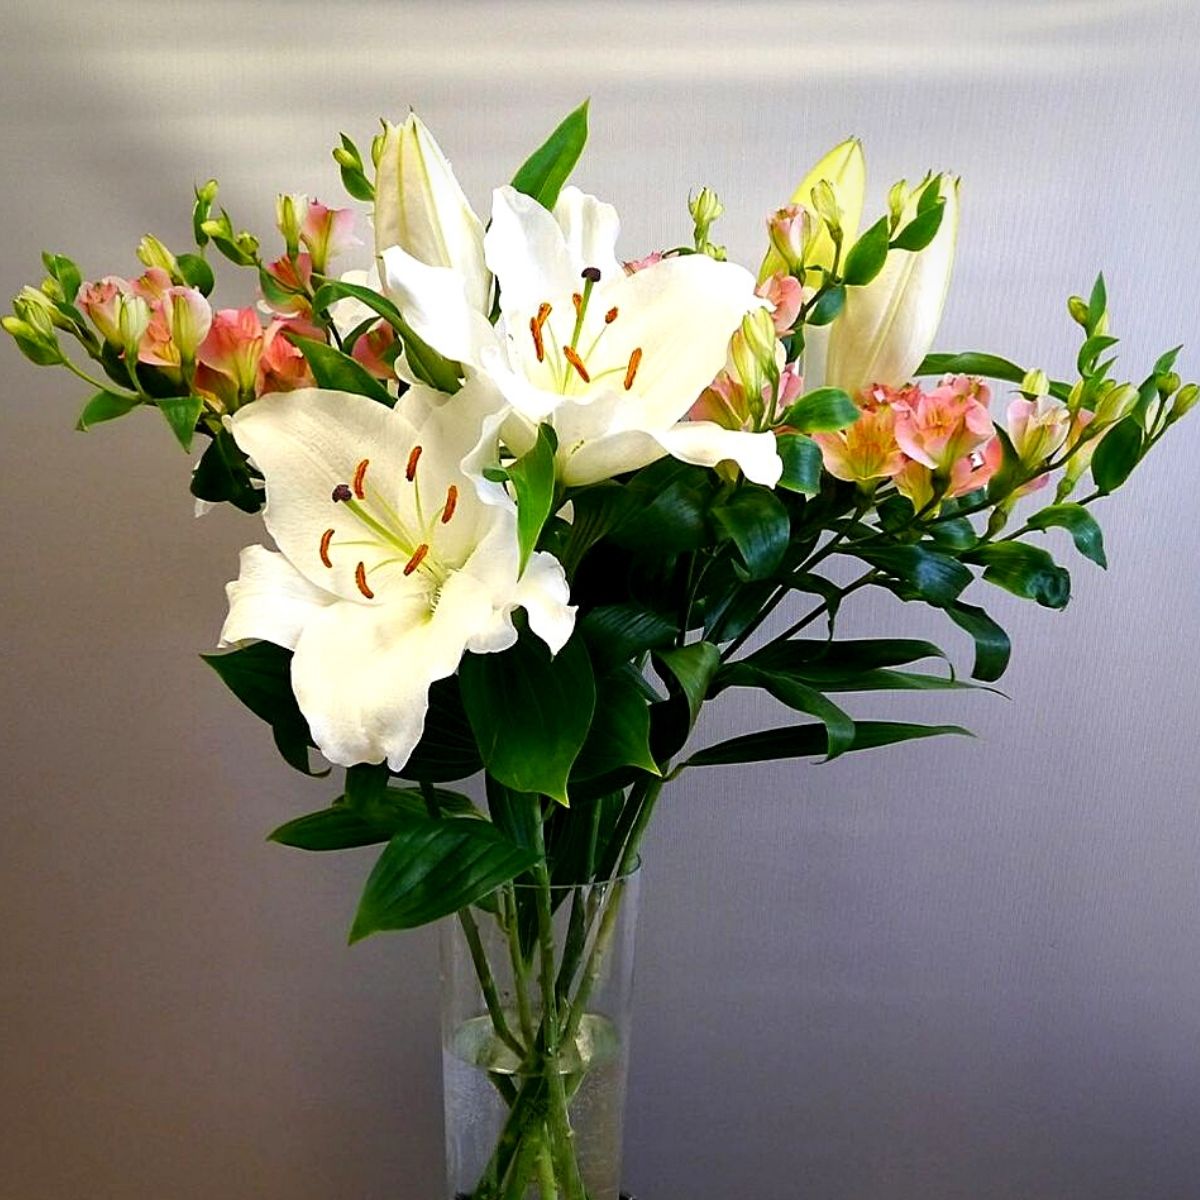 Express Your Creativity With The Enchanting Alstroemeria Blooms